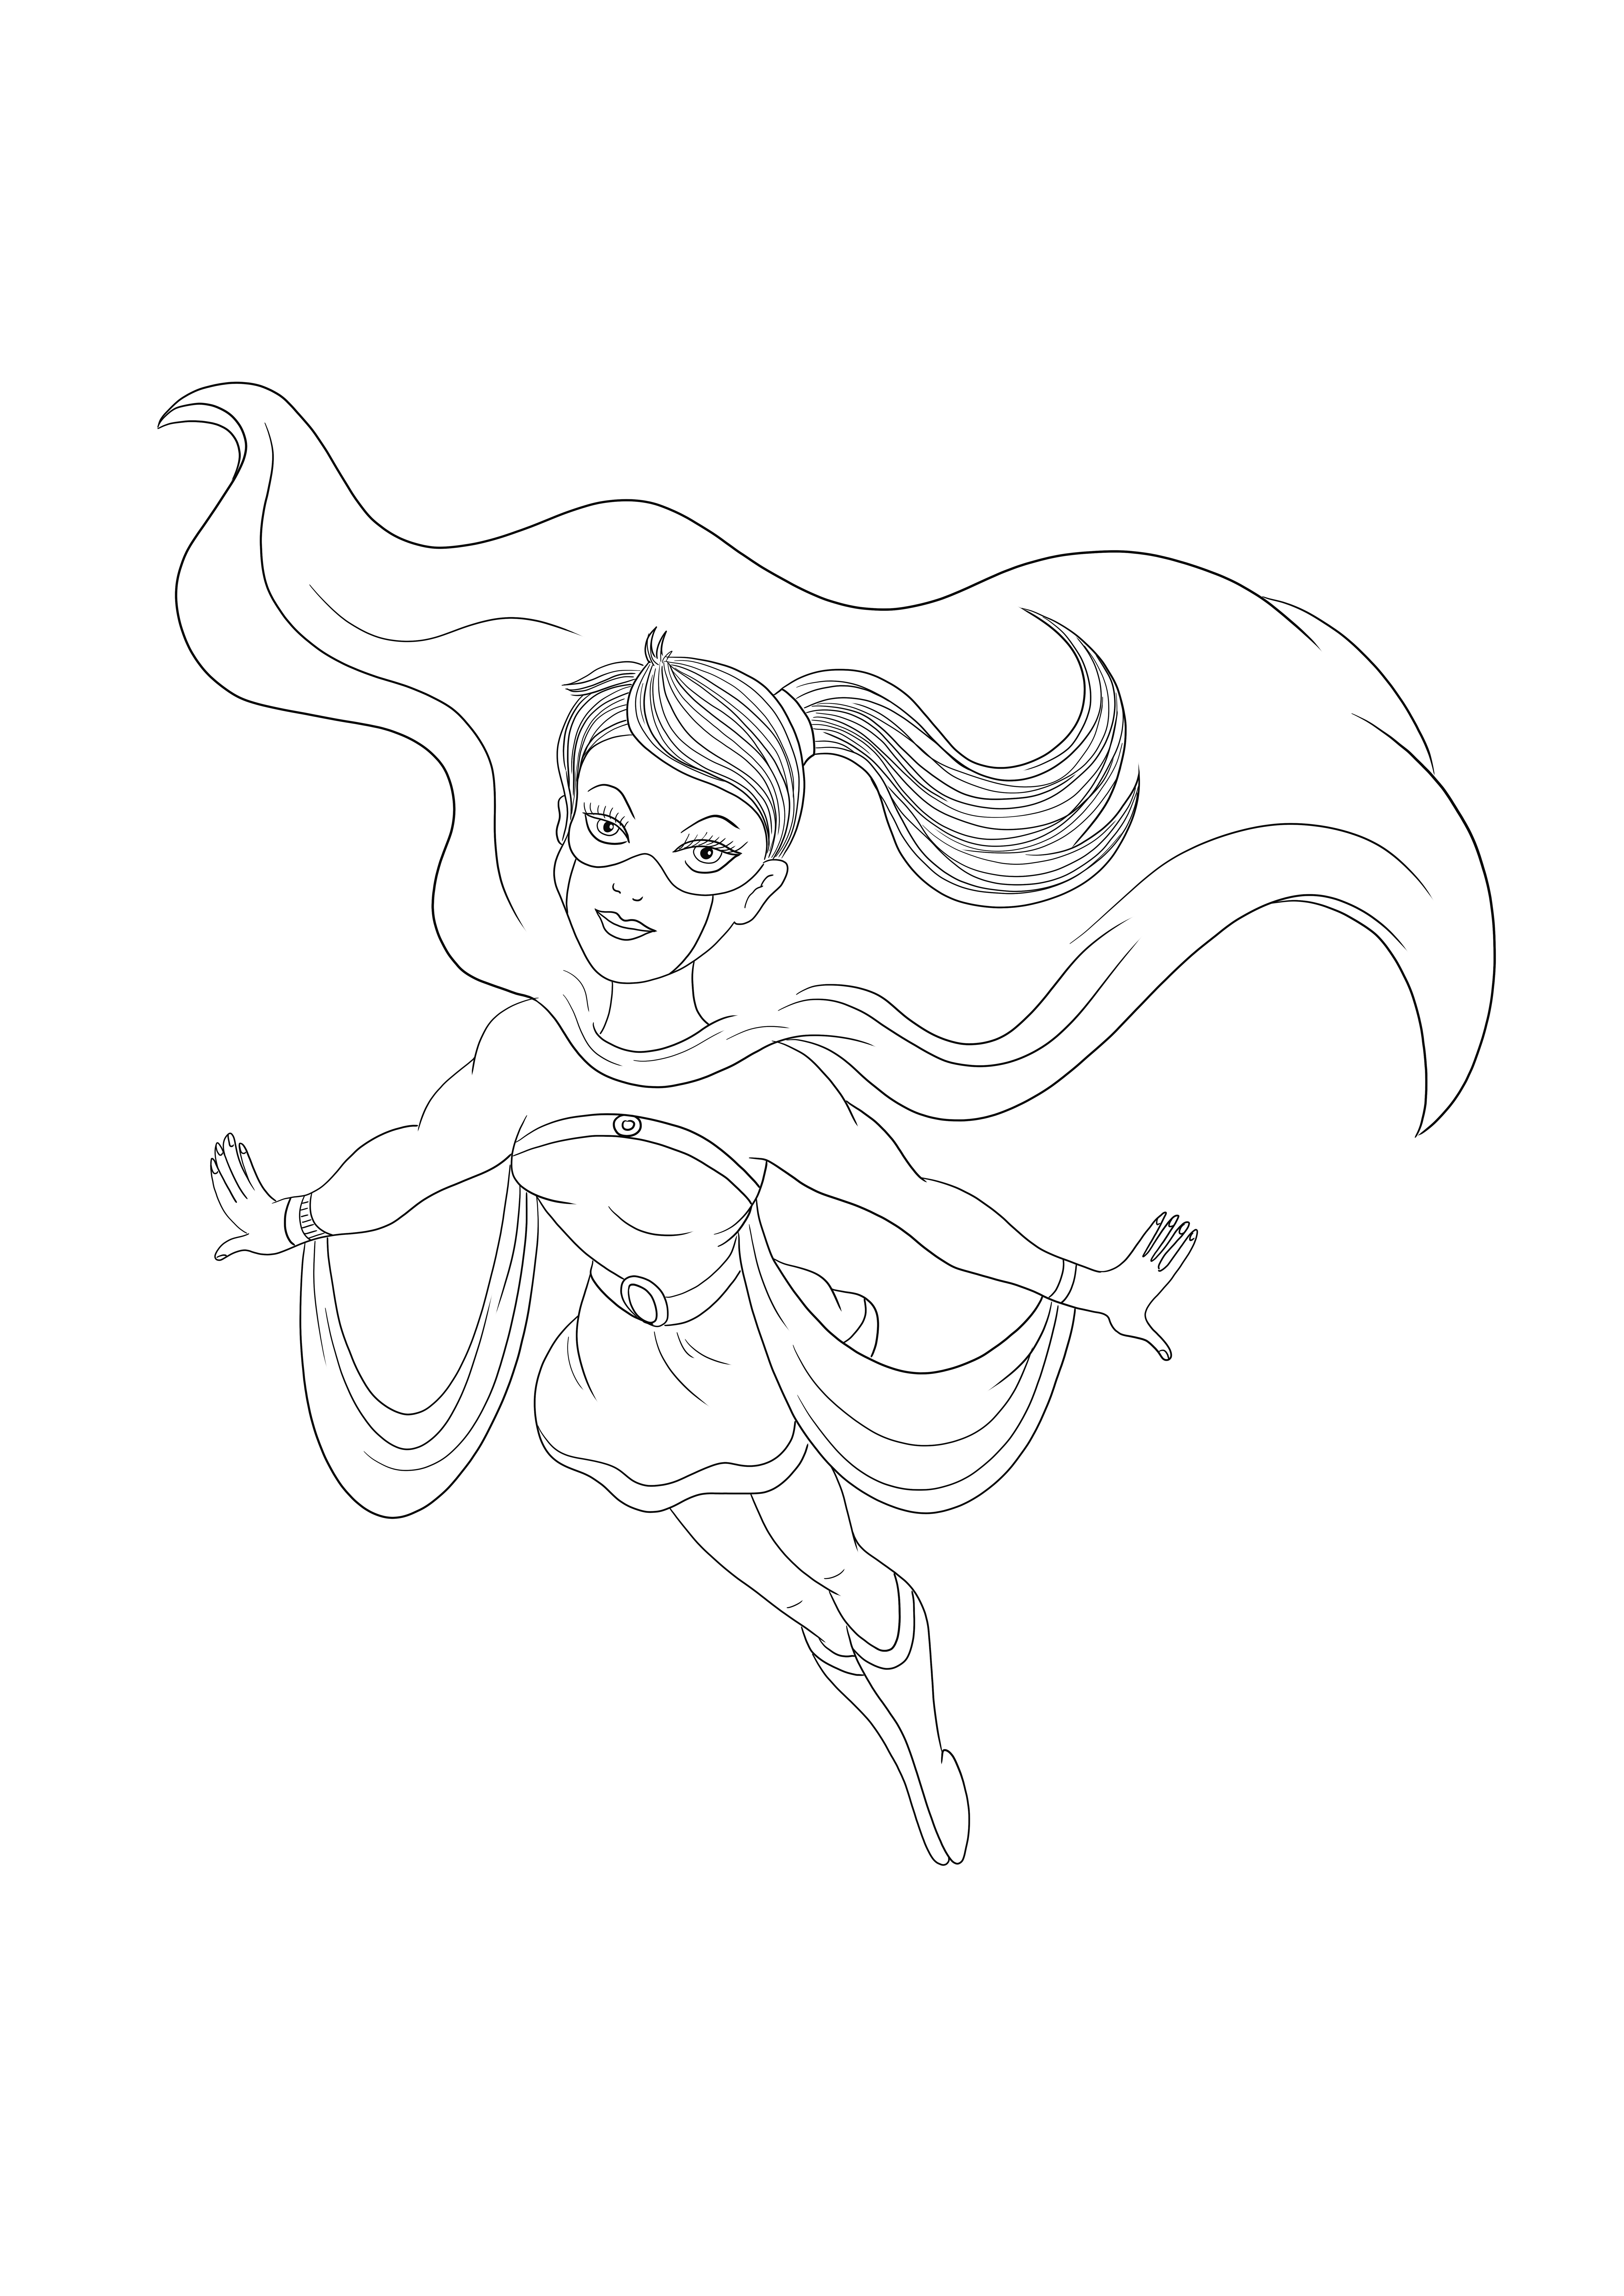 Supergirl is flying to rescue and waits to be colored for free